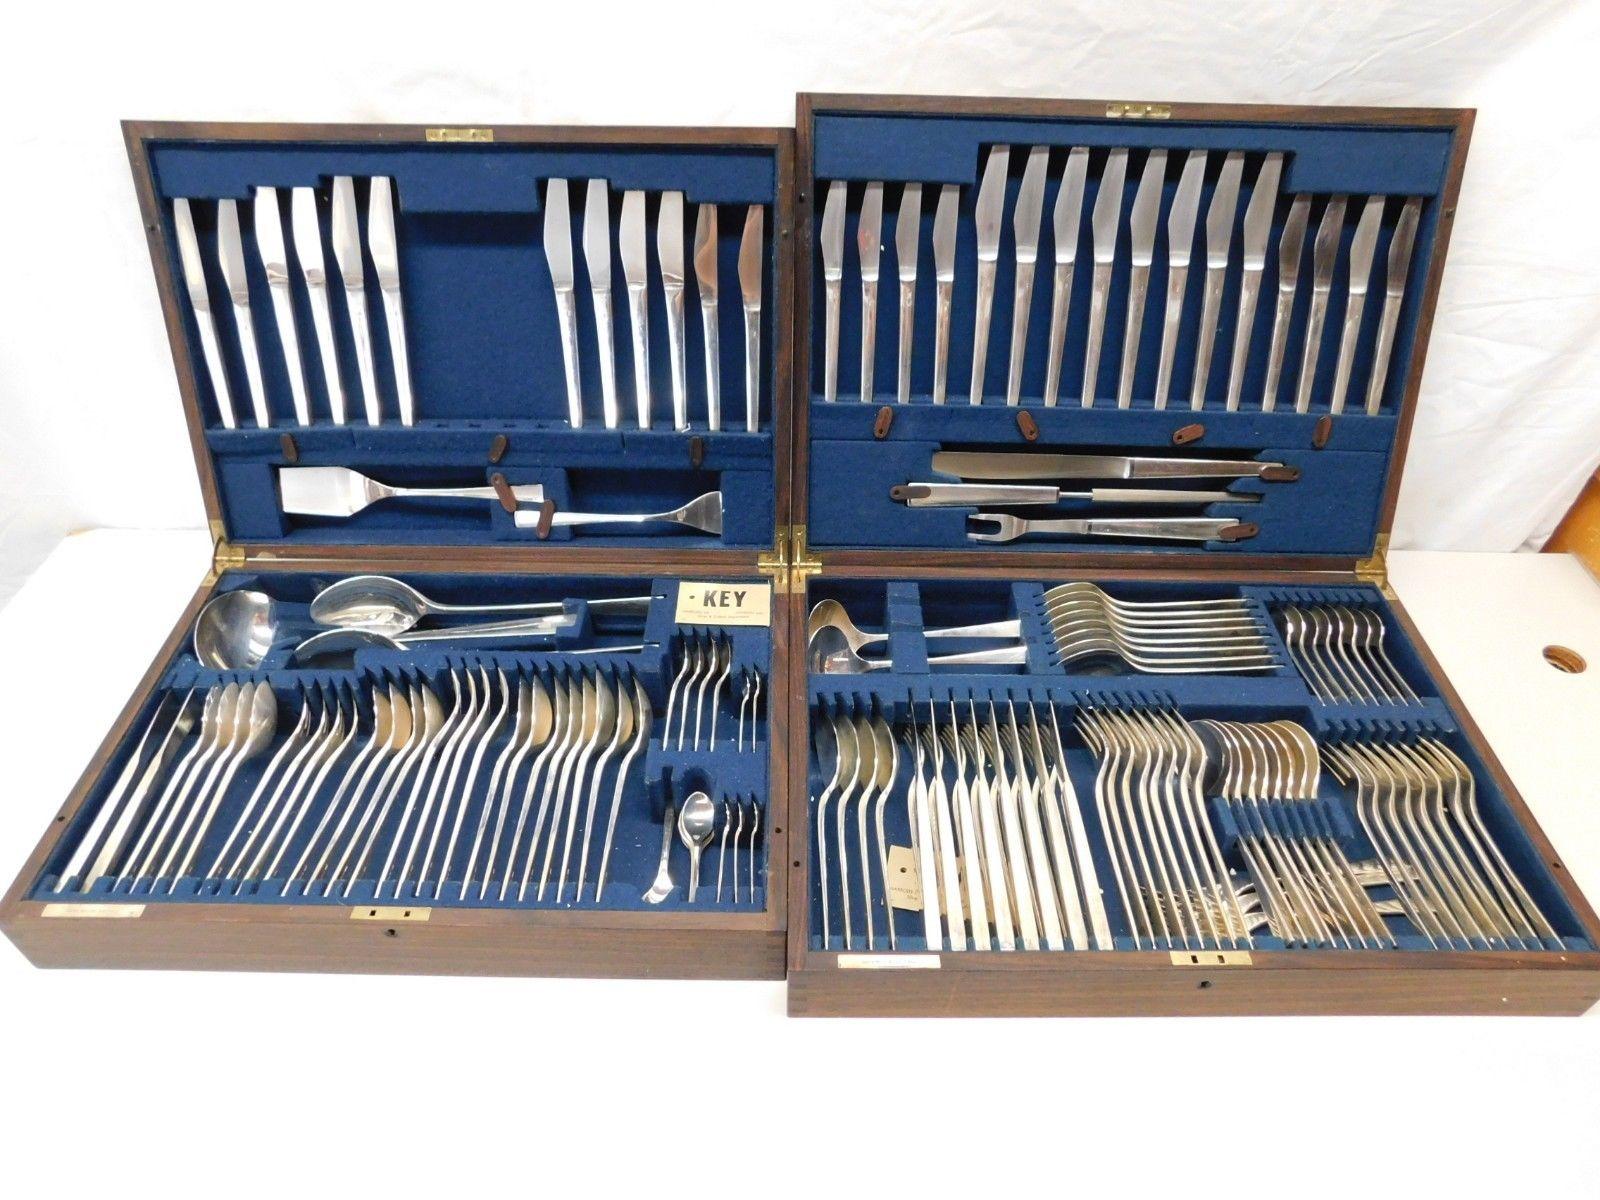 Embassy by David Mellor Schefiled sterling silver flatware set - 149 pieces. This set includes:

12 dinner knives, all-sterling, 9